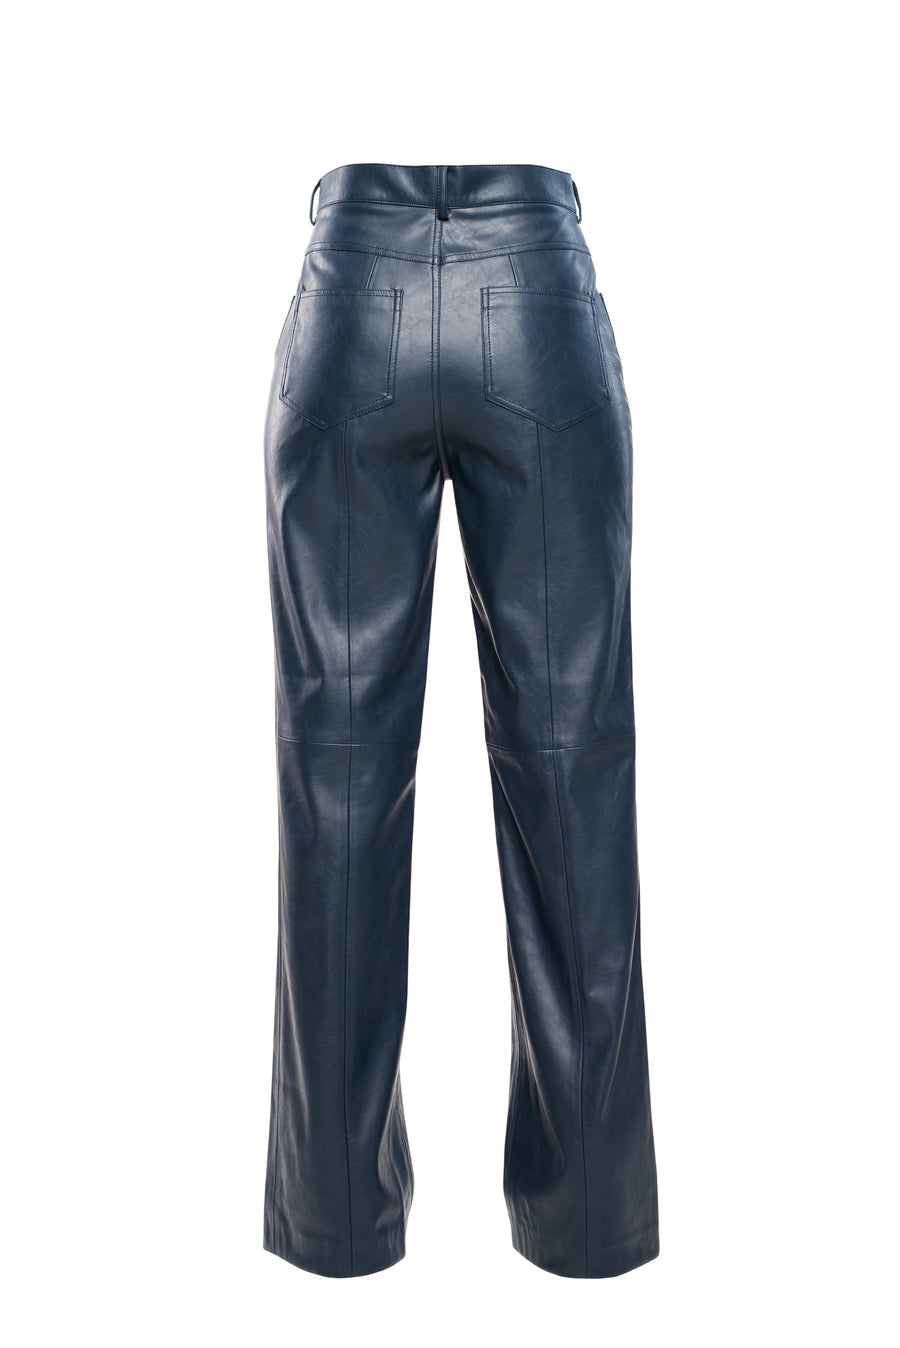 Eco Leather Trouser in Navy Blue